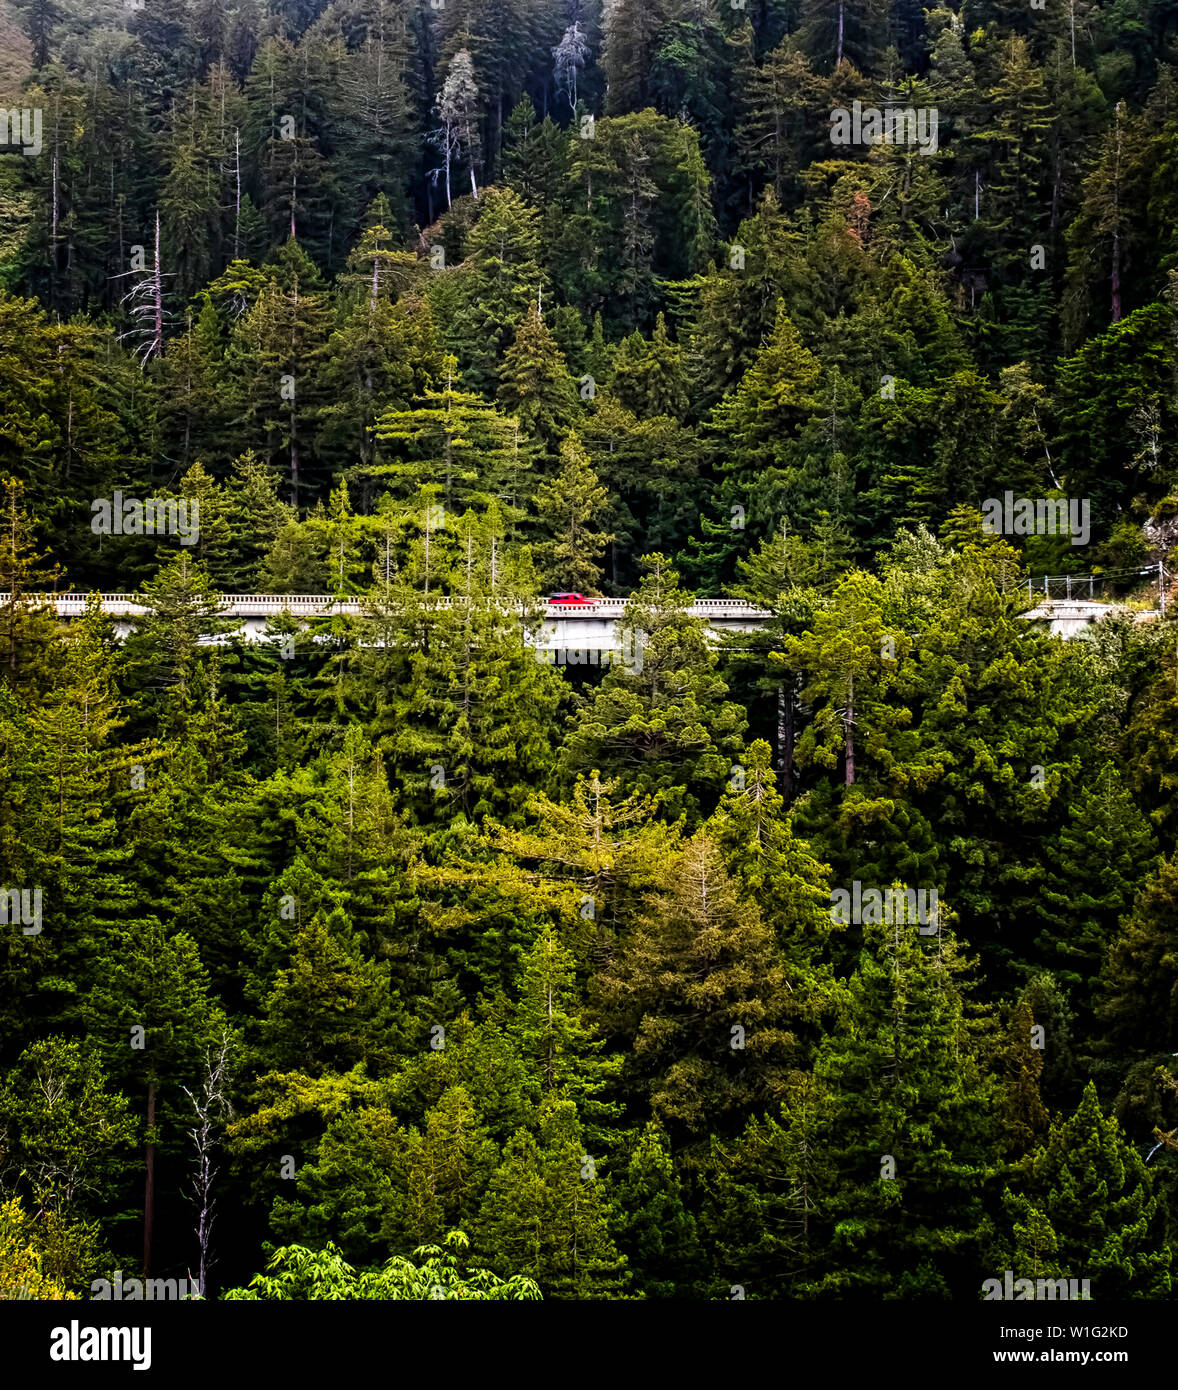 Single red car passes through forest of pine trees on California Highway 1 Stock Photo